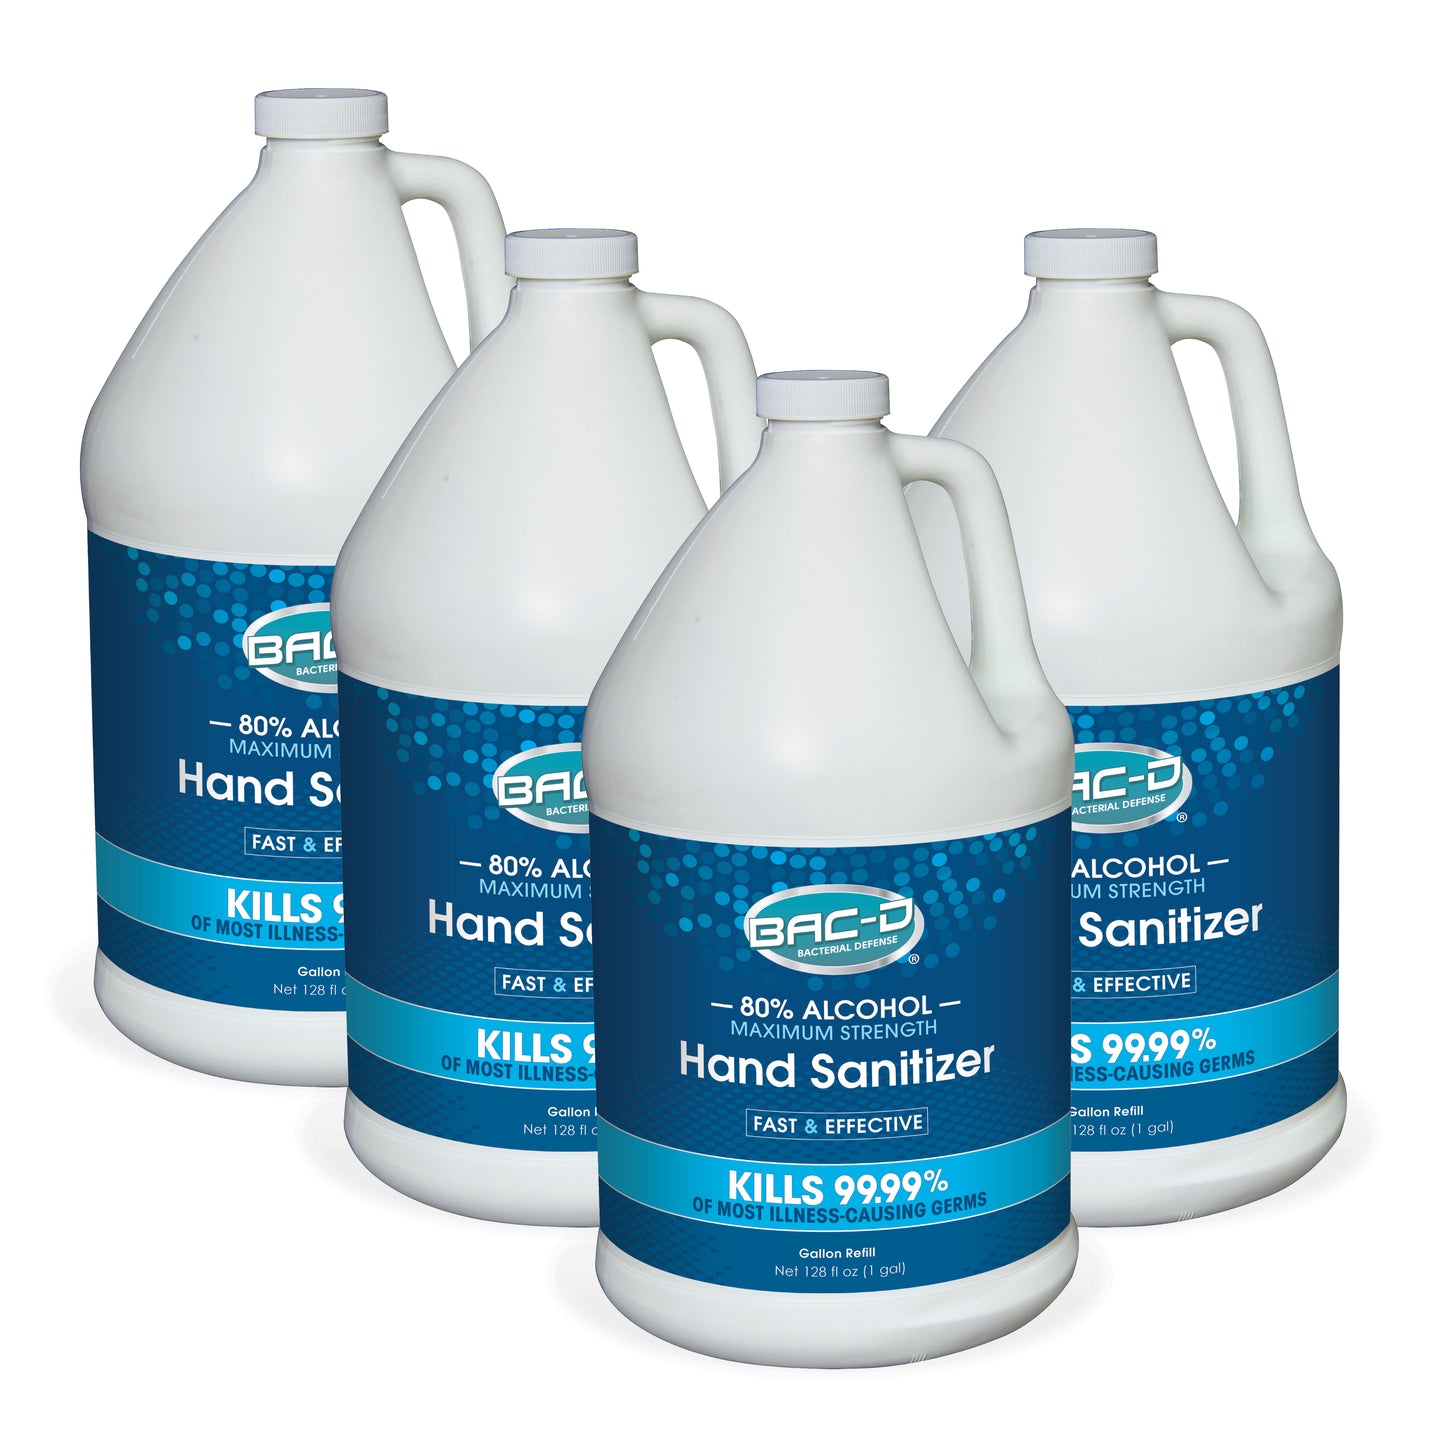 NEW!  BAC-D® ALCOHOL Hand Sanitizer - One Gallon Refill Pack of 4